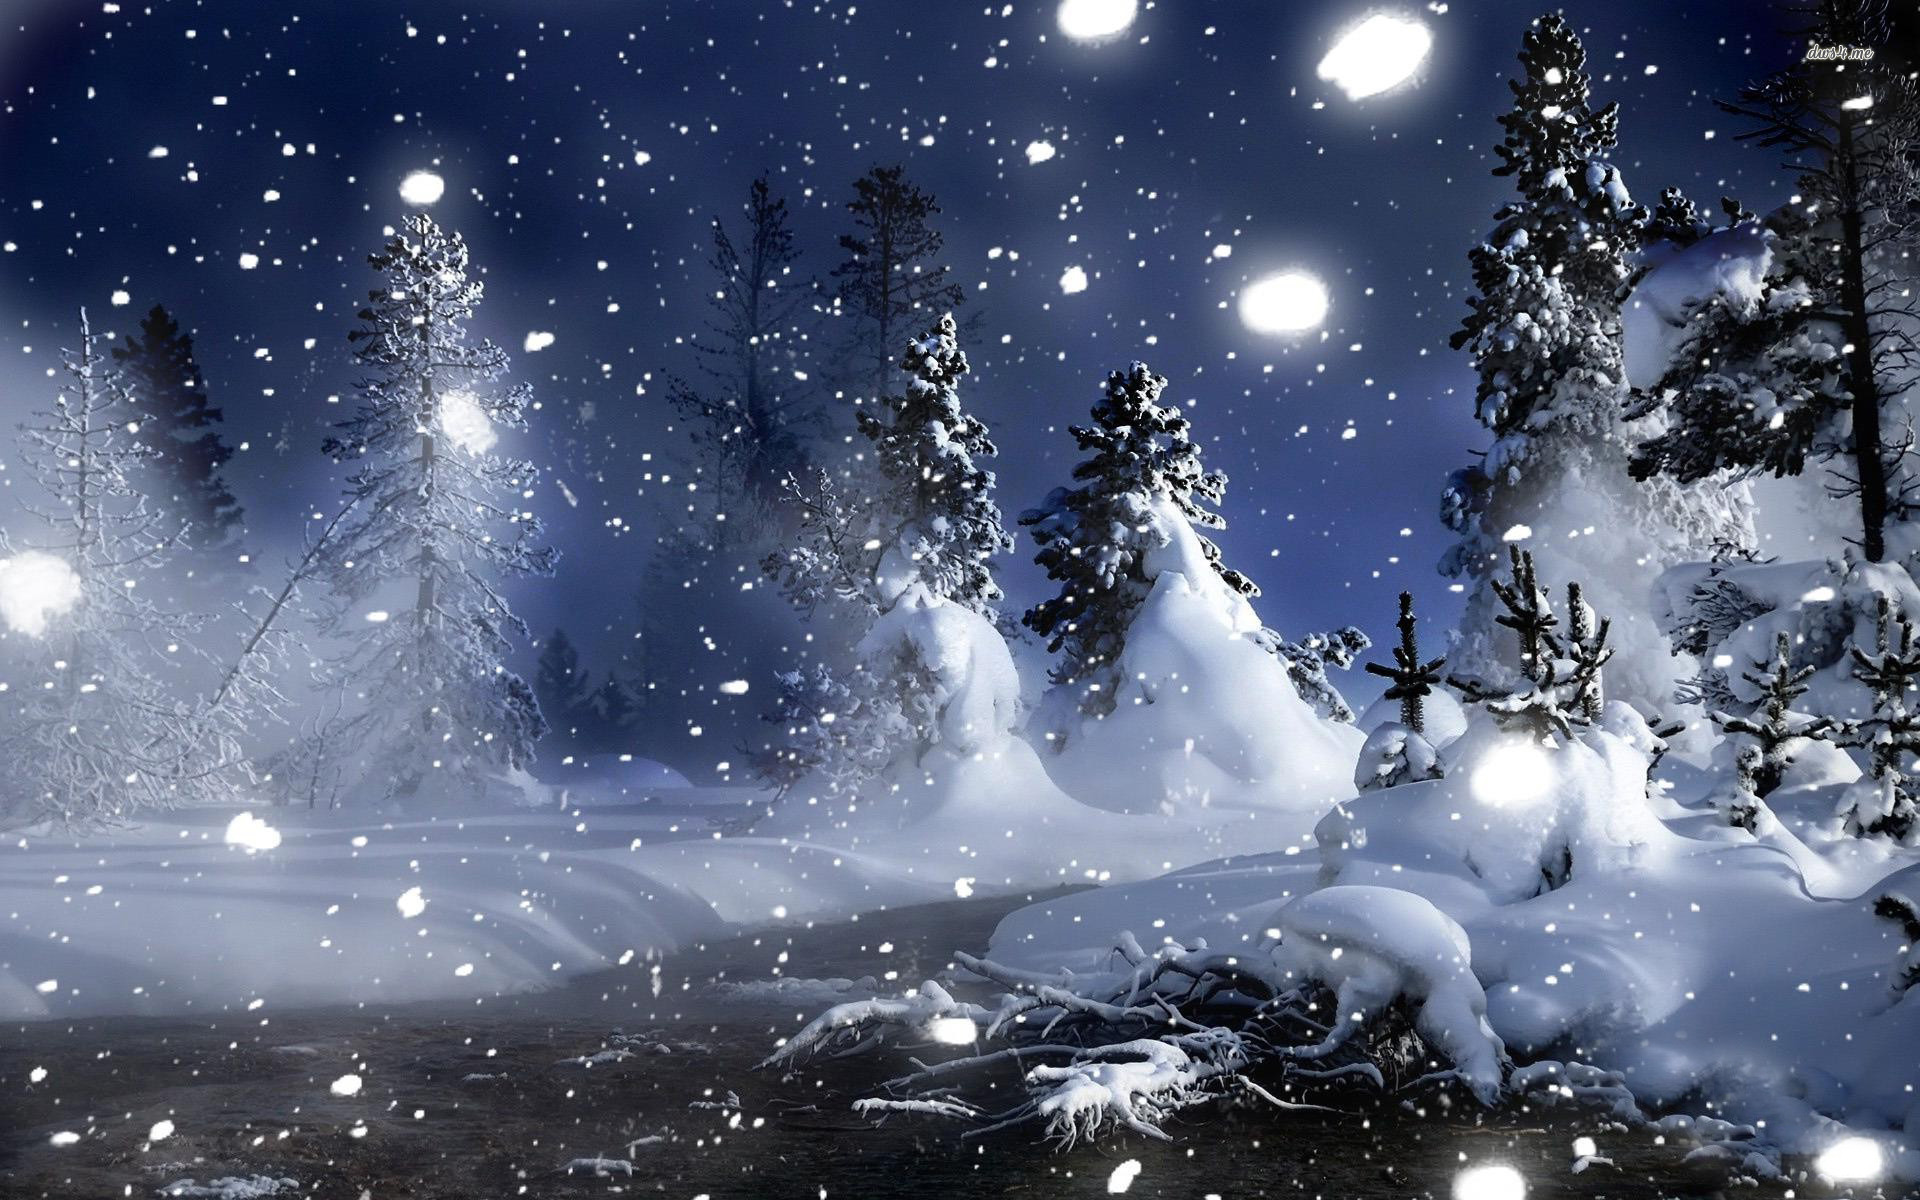 Snowy Night Wallpaper - Snowy Trees At Night , HD Wallpaper & Backgrounds